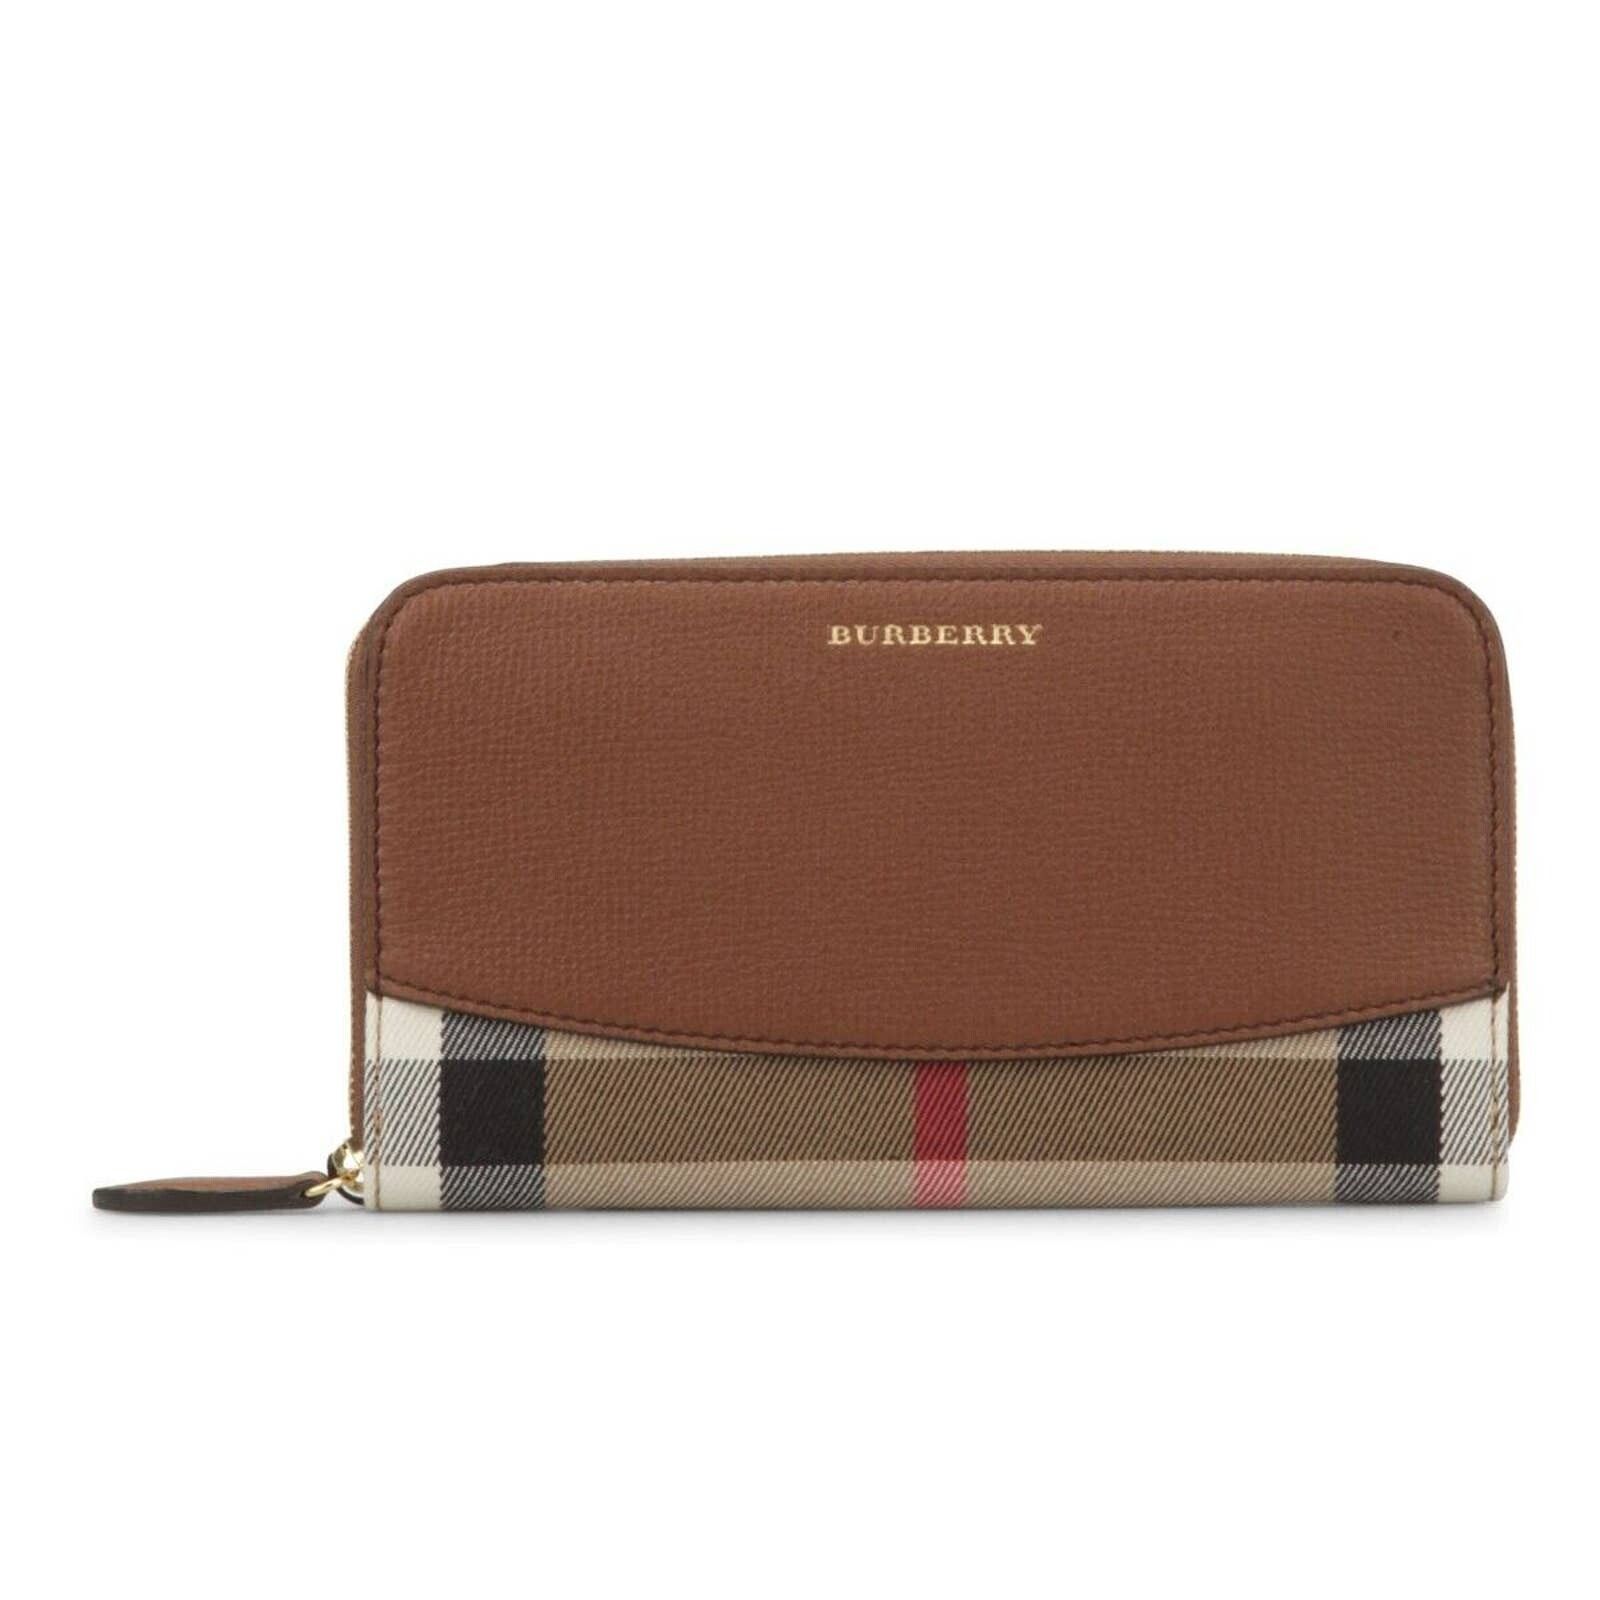 Burberry ELMORE BROWN HOUSE CHECK LEATHER ZIP LOGO CLUTCH WALLET Size ONE SIZE - 1 Preview